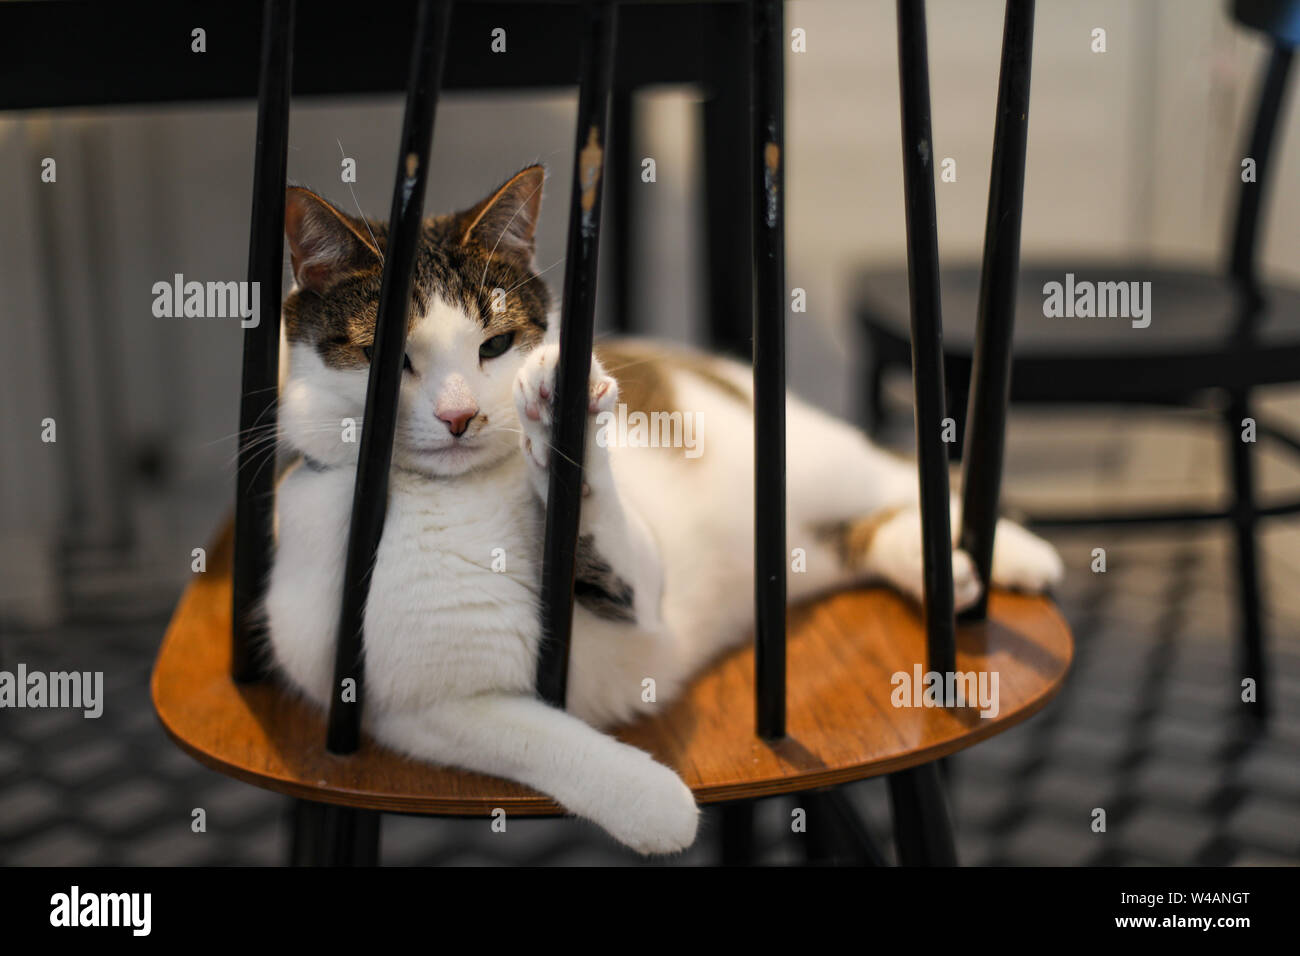 Random-bred tabby cat on a kitchen chair Stock Photo